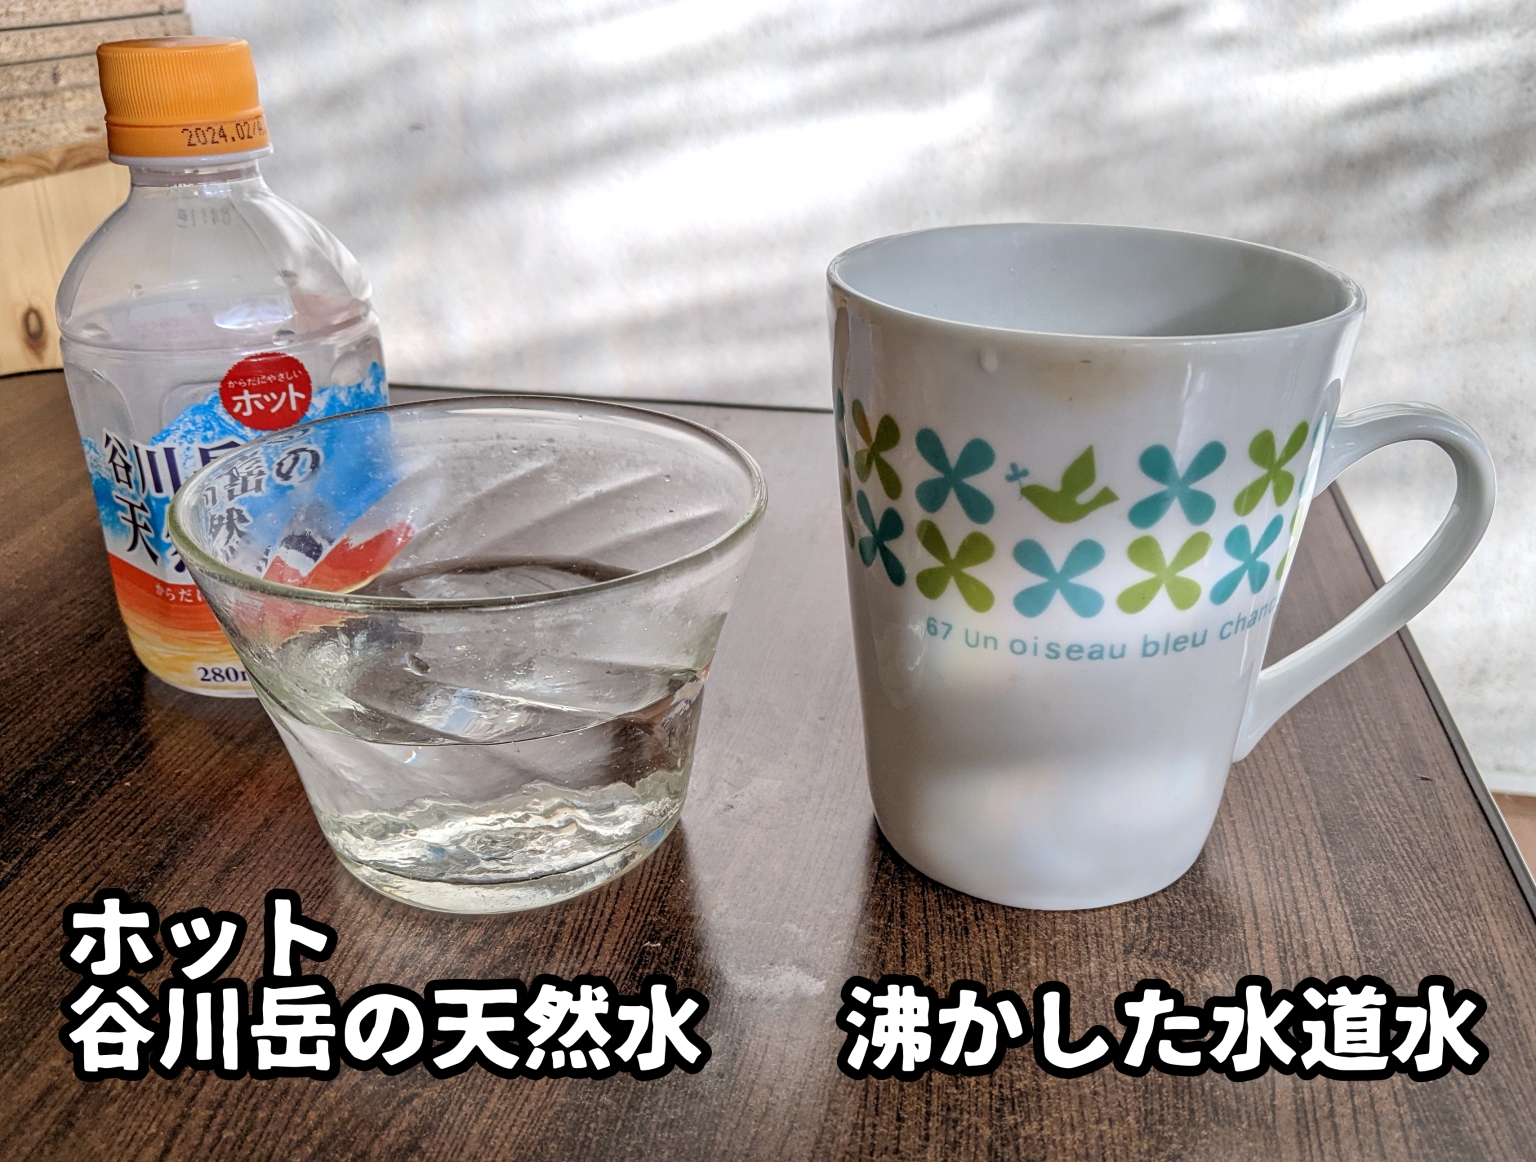 Japanese-convenience-stores-7-Eleven-hot-water-drinks-review-new-photos-9.jpg